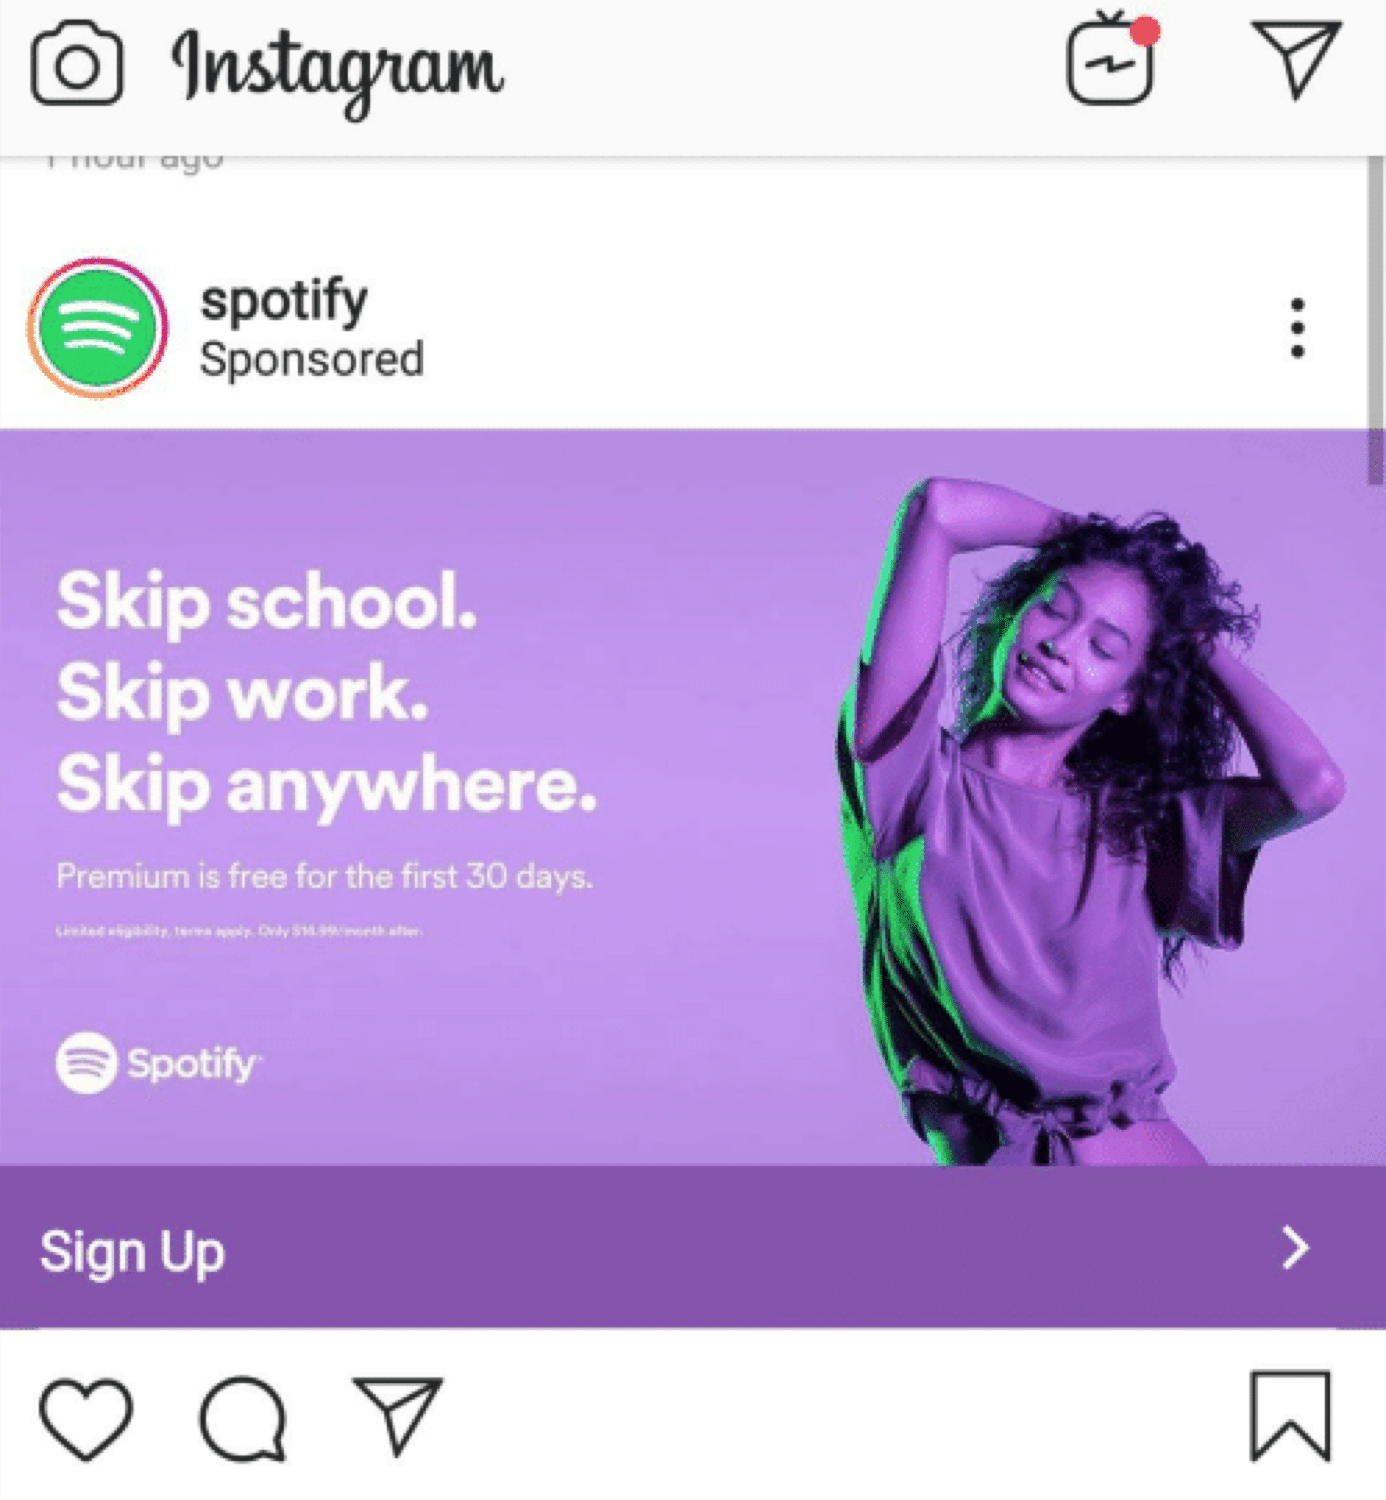 An example of an Instagram ad